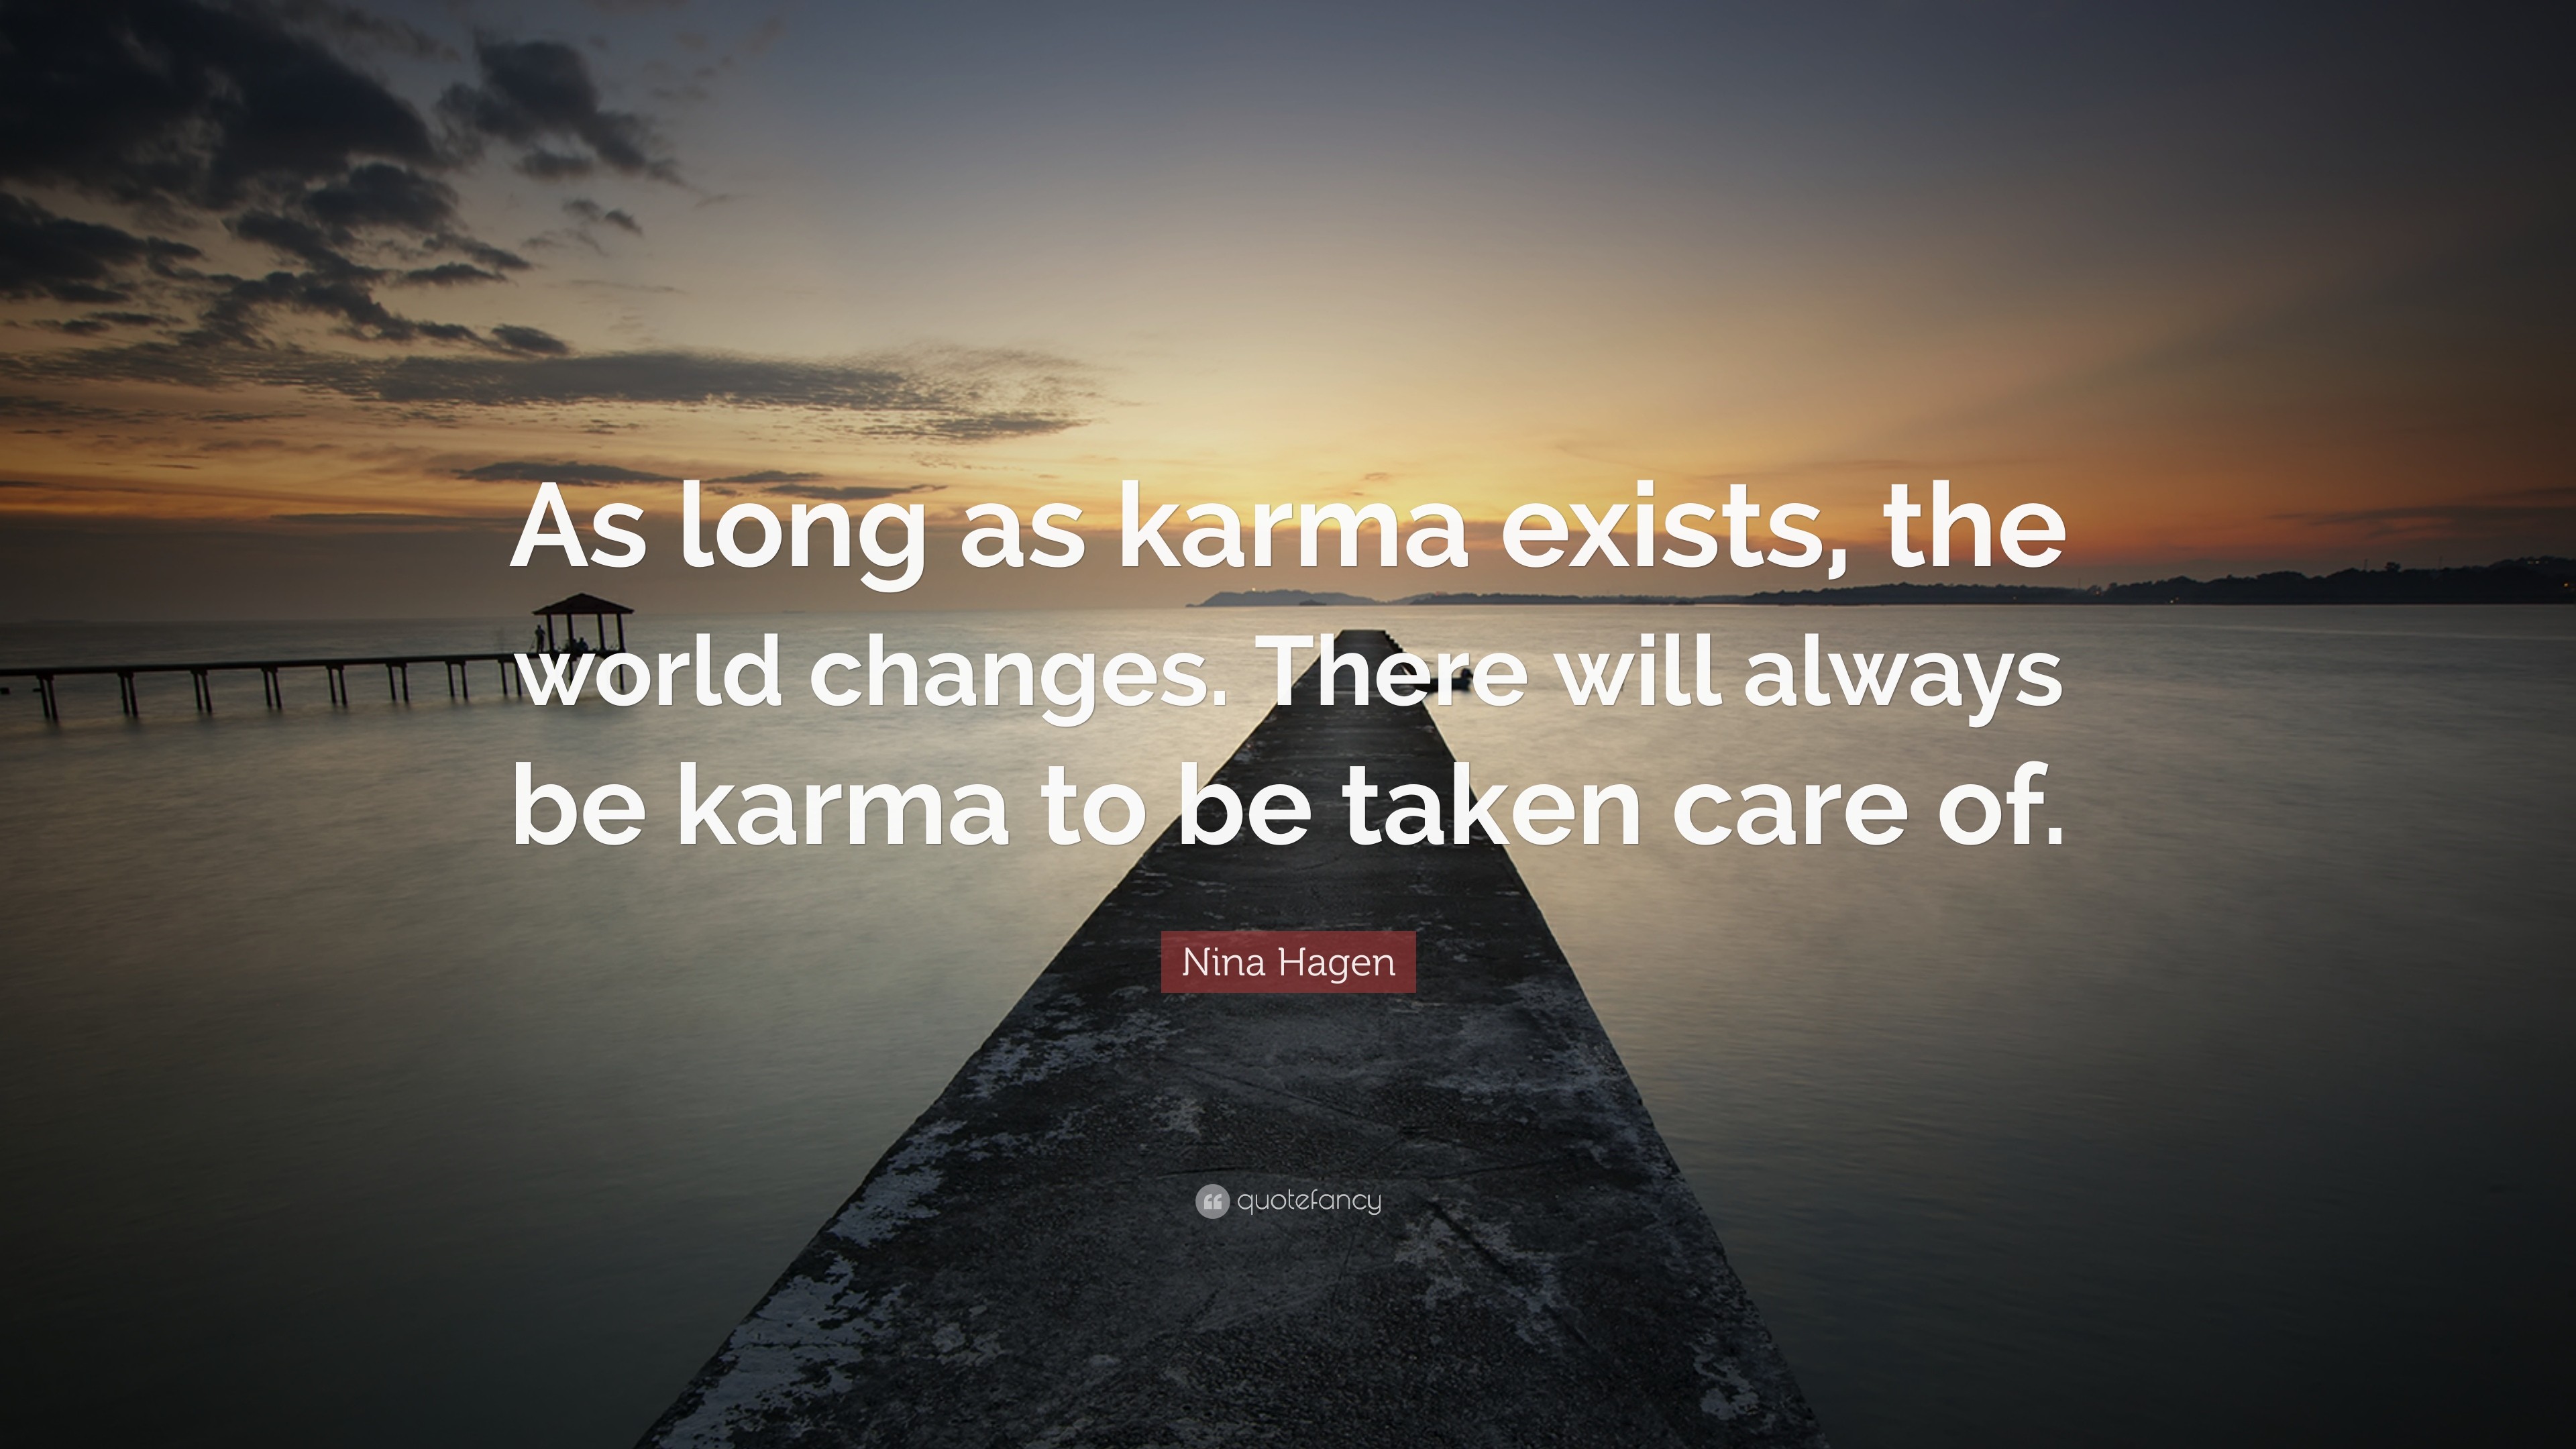 3840x2160 Nina Hagen Quote: “As long as karma exists, the world changes. There